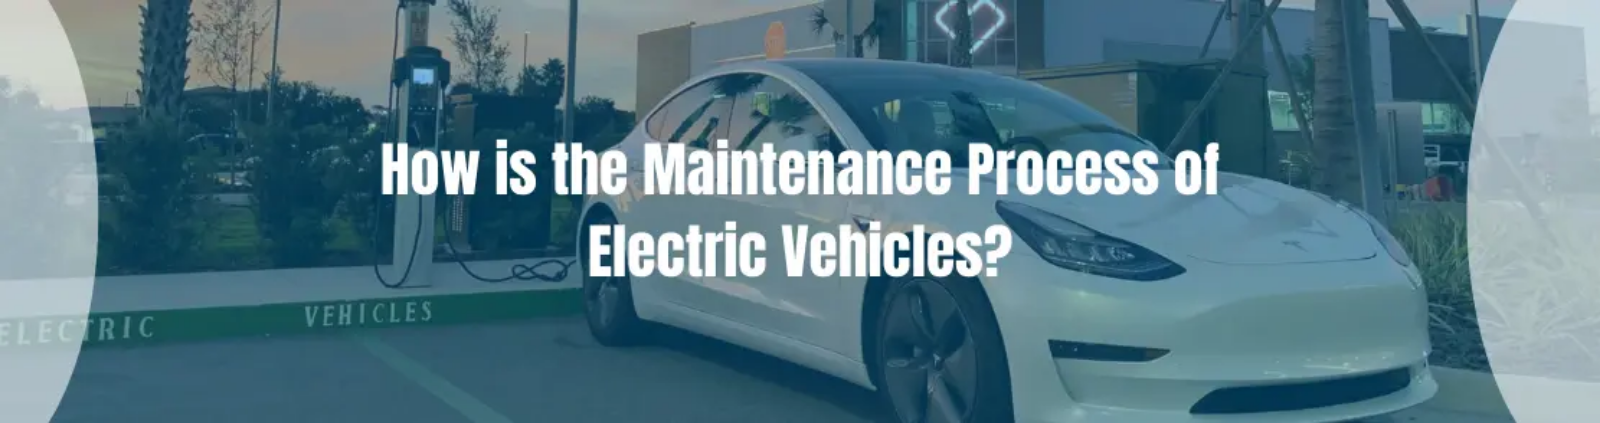 How is the maintenance process of electric vehicles?